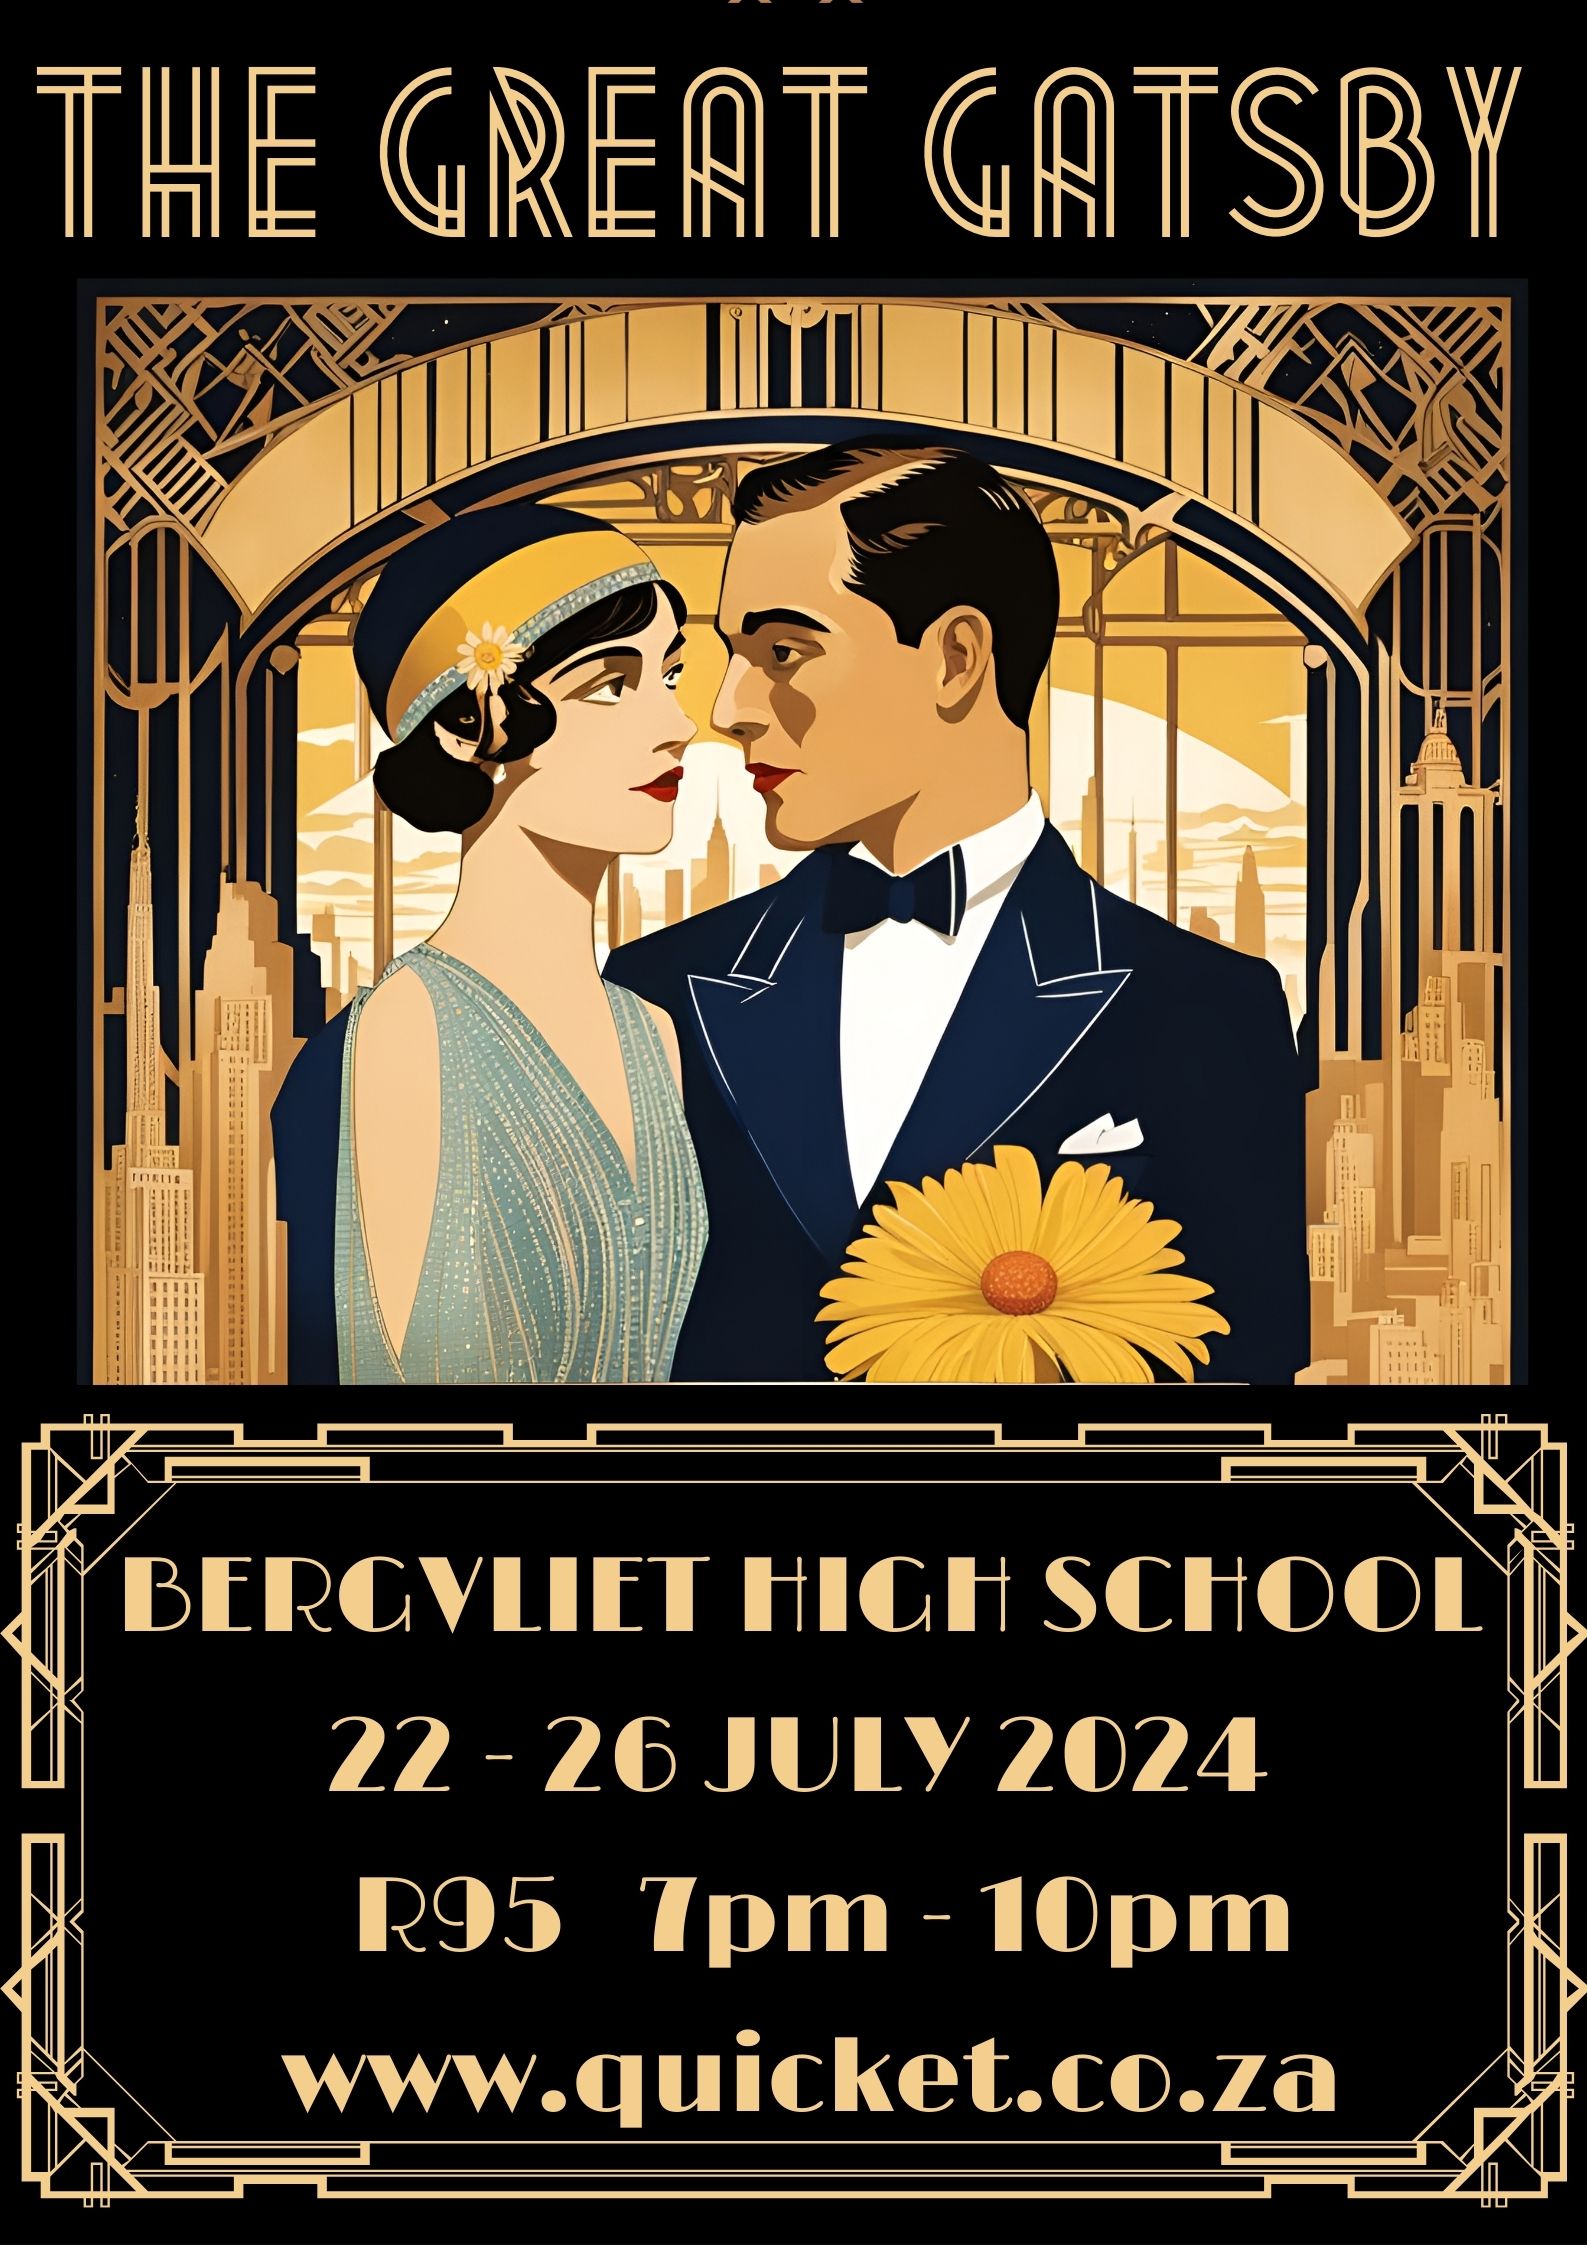 Bergvliet High School are proud to announce The Great Gatsby